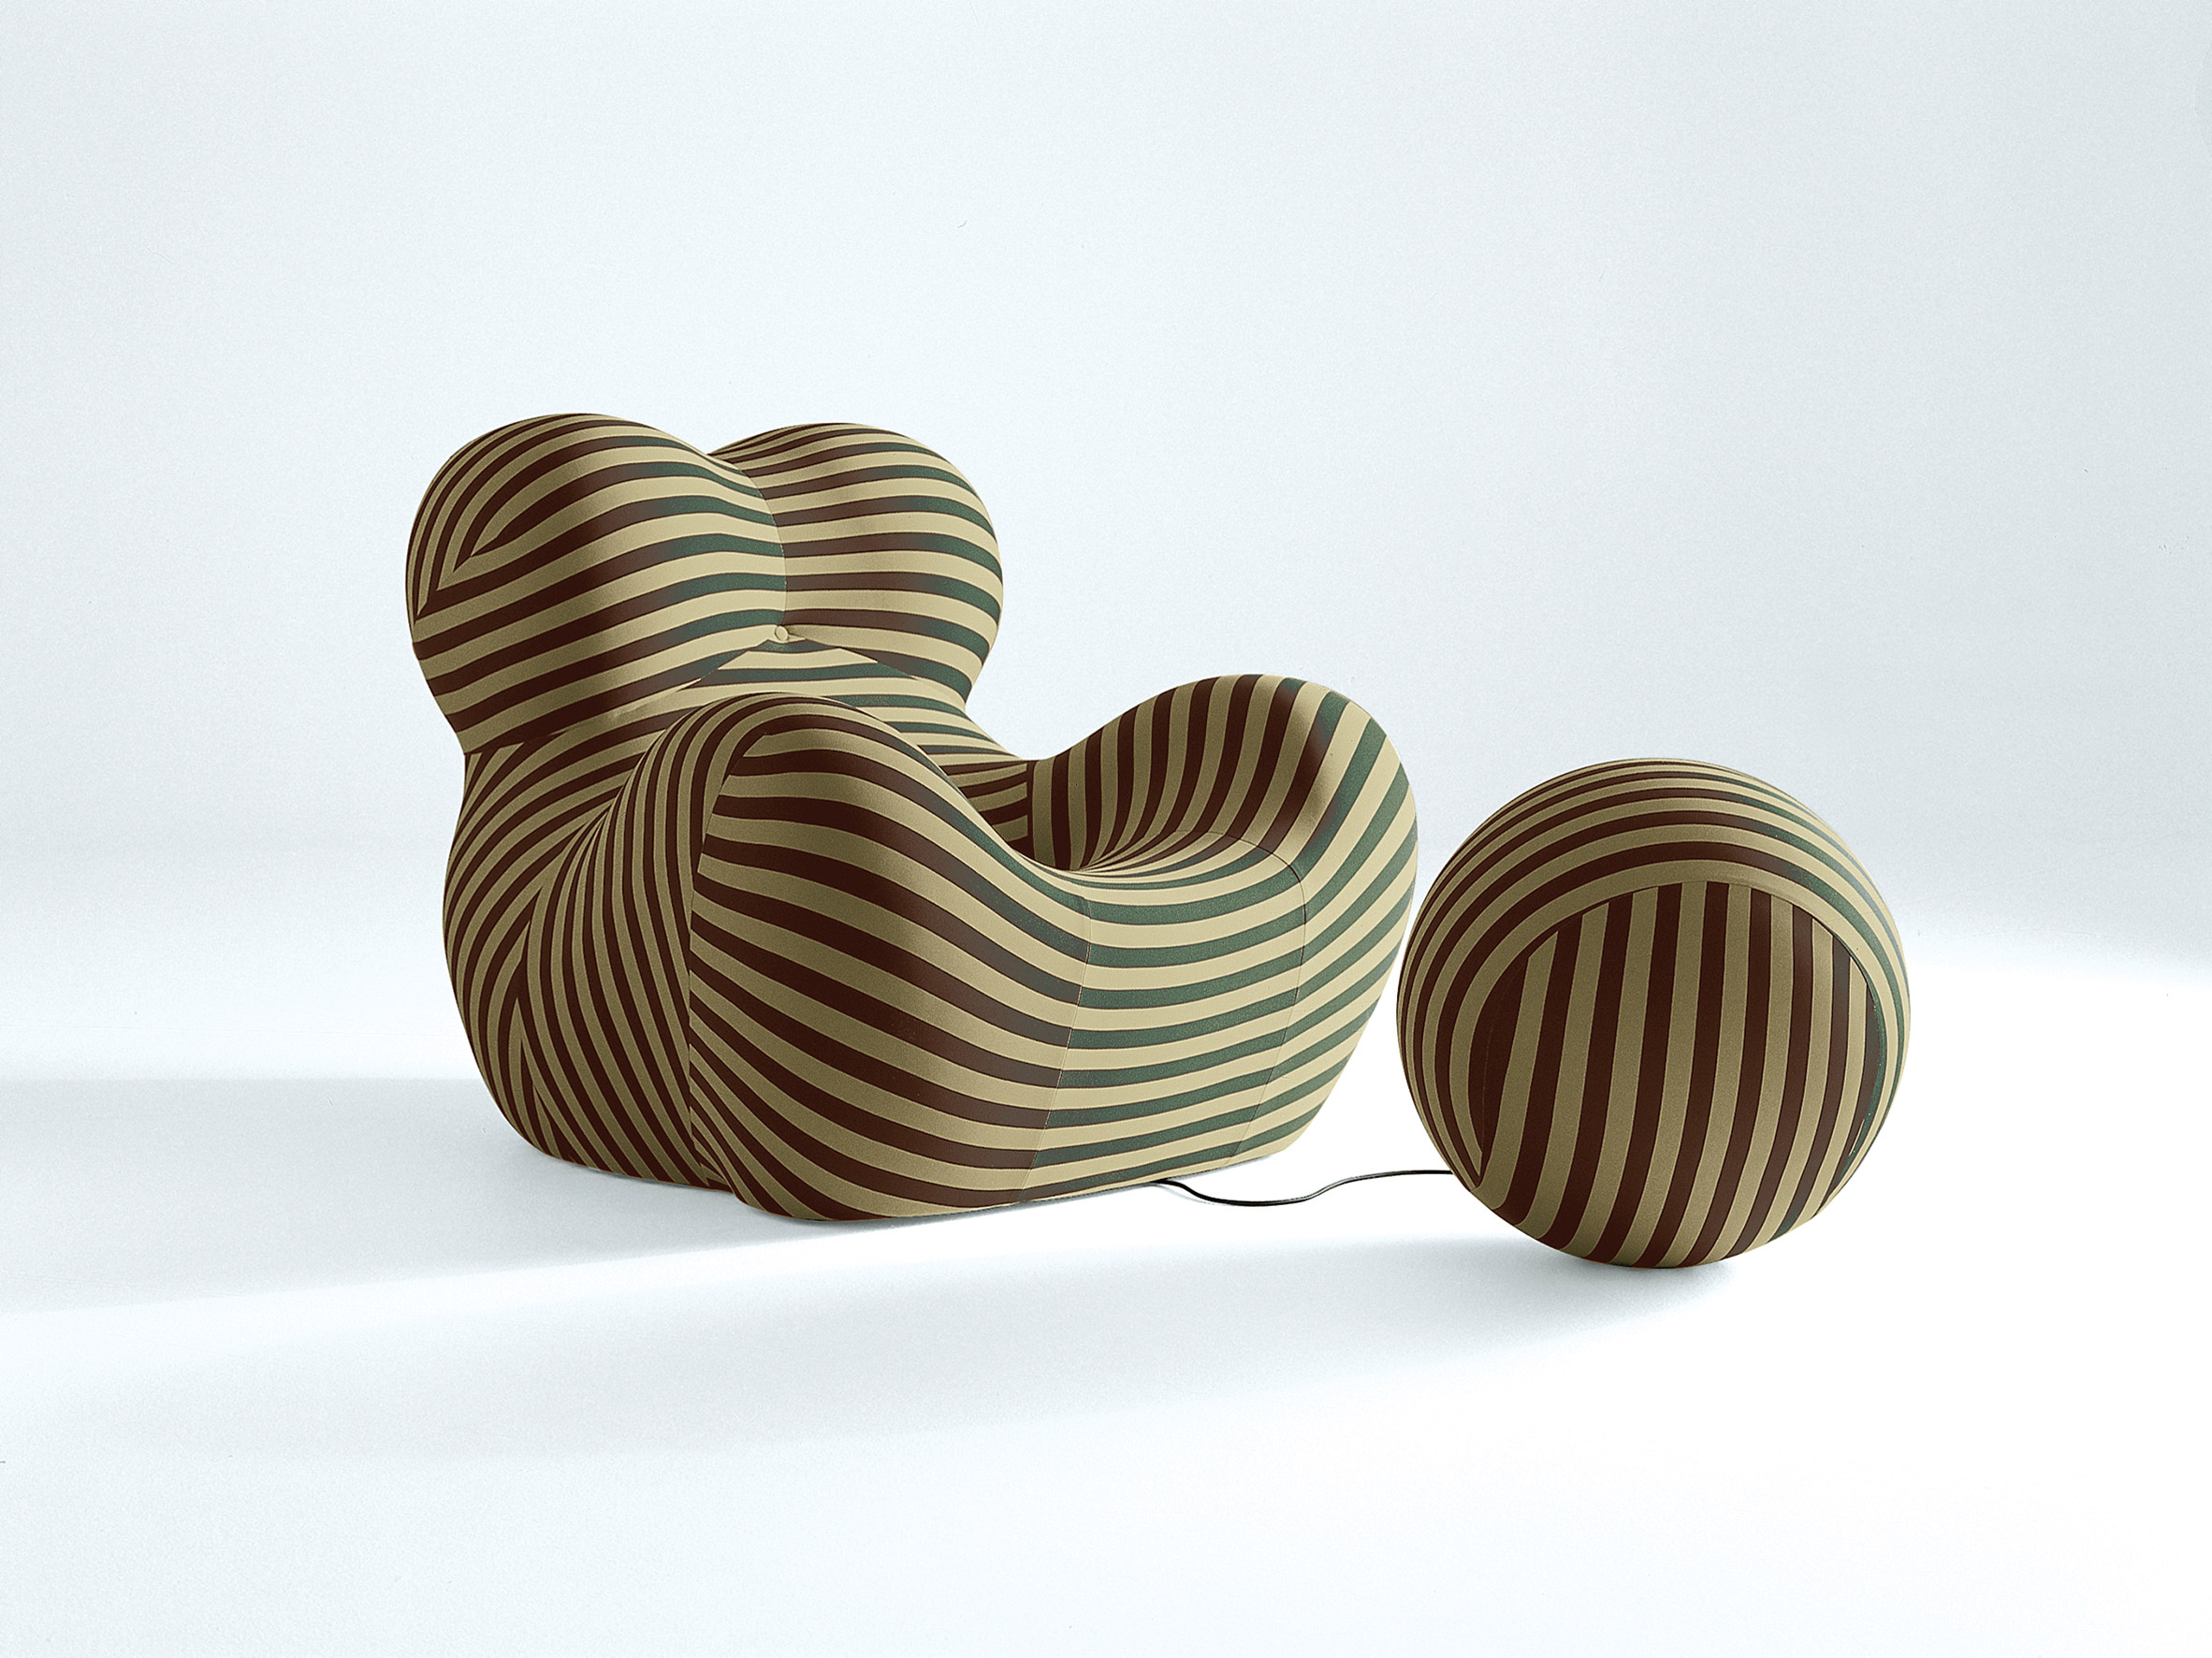 50th anniversary edition of the Up5 armchair and Up6 footstool by Gaetano Pesce